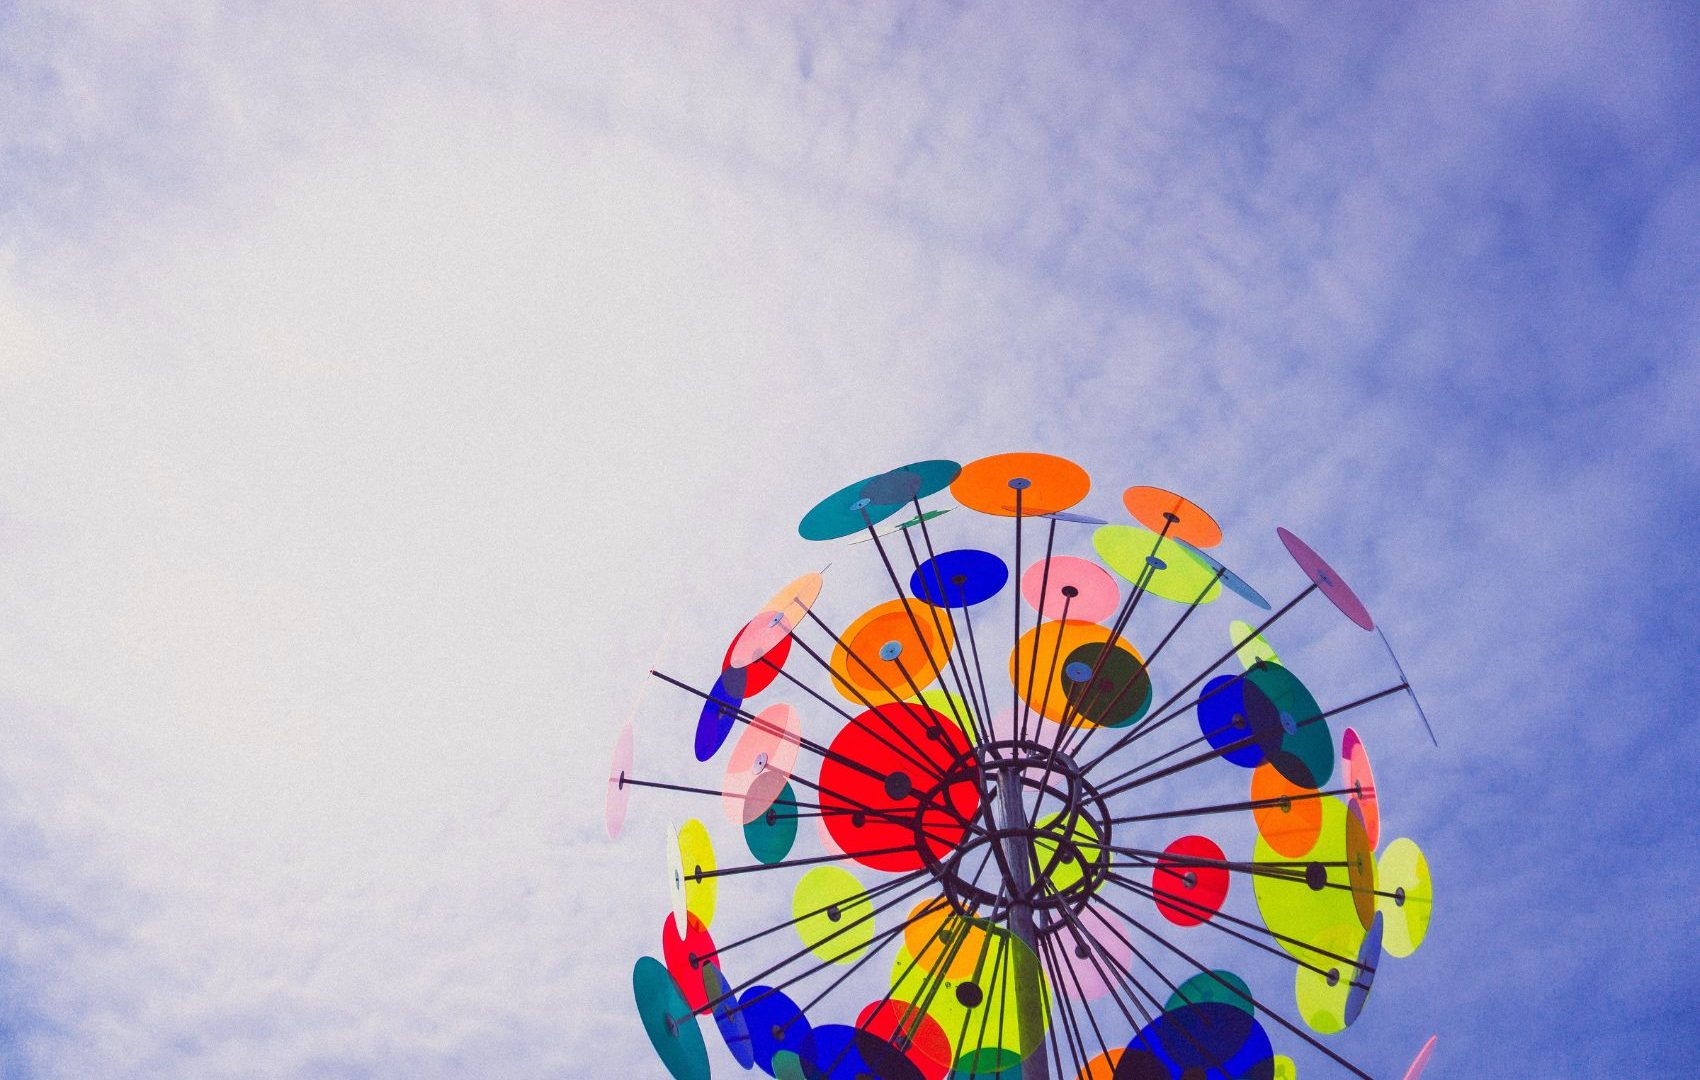 colorful-disc-sculpture-in-blue-cloudy-sky-photo